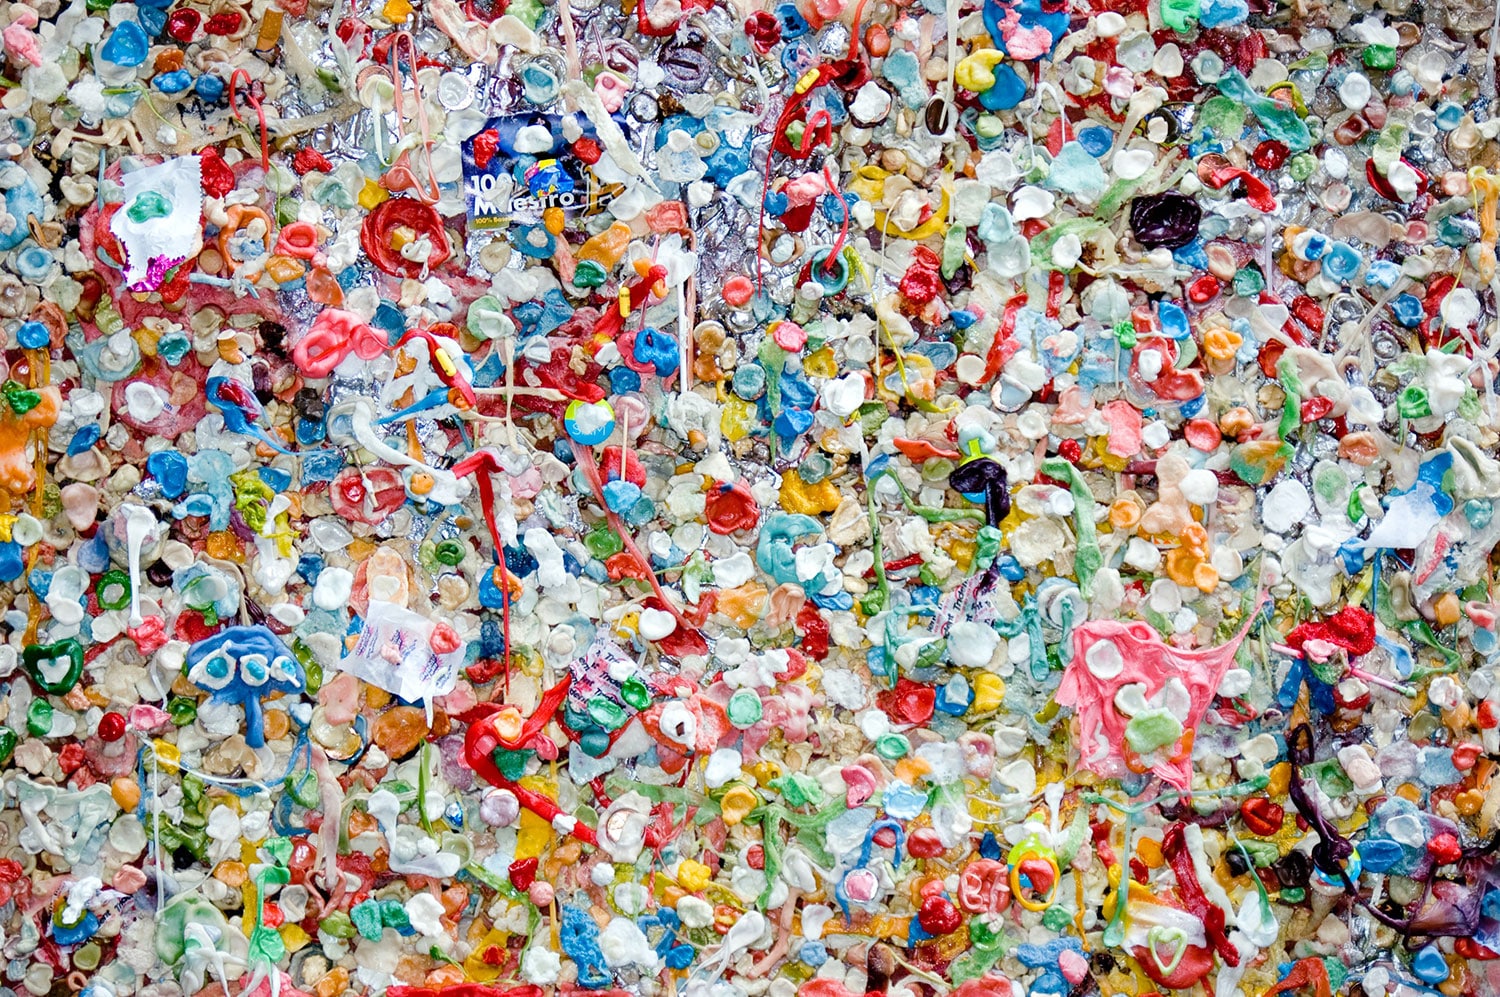 Researchers find way to recycle previously unrecyclable plastic.